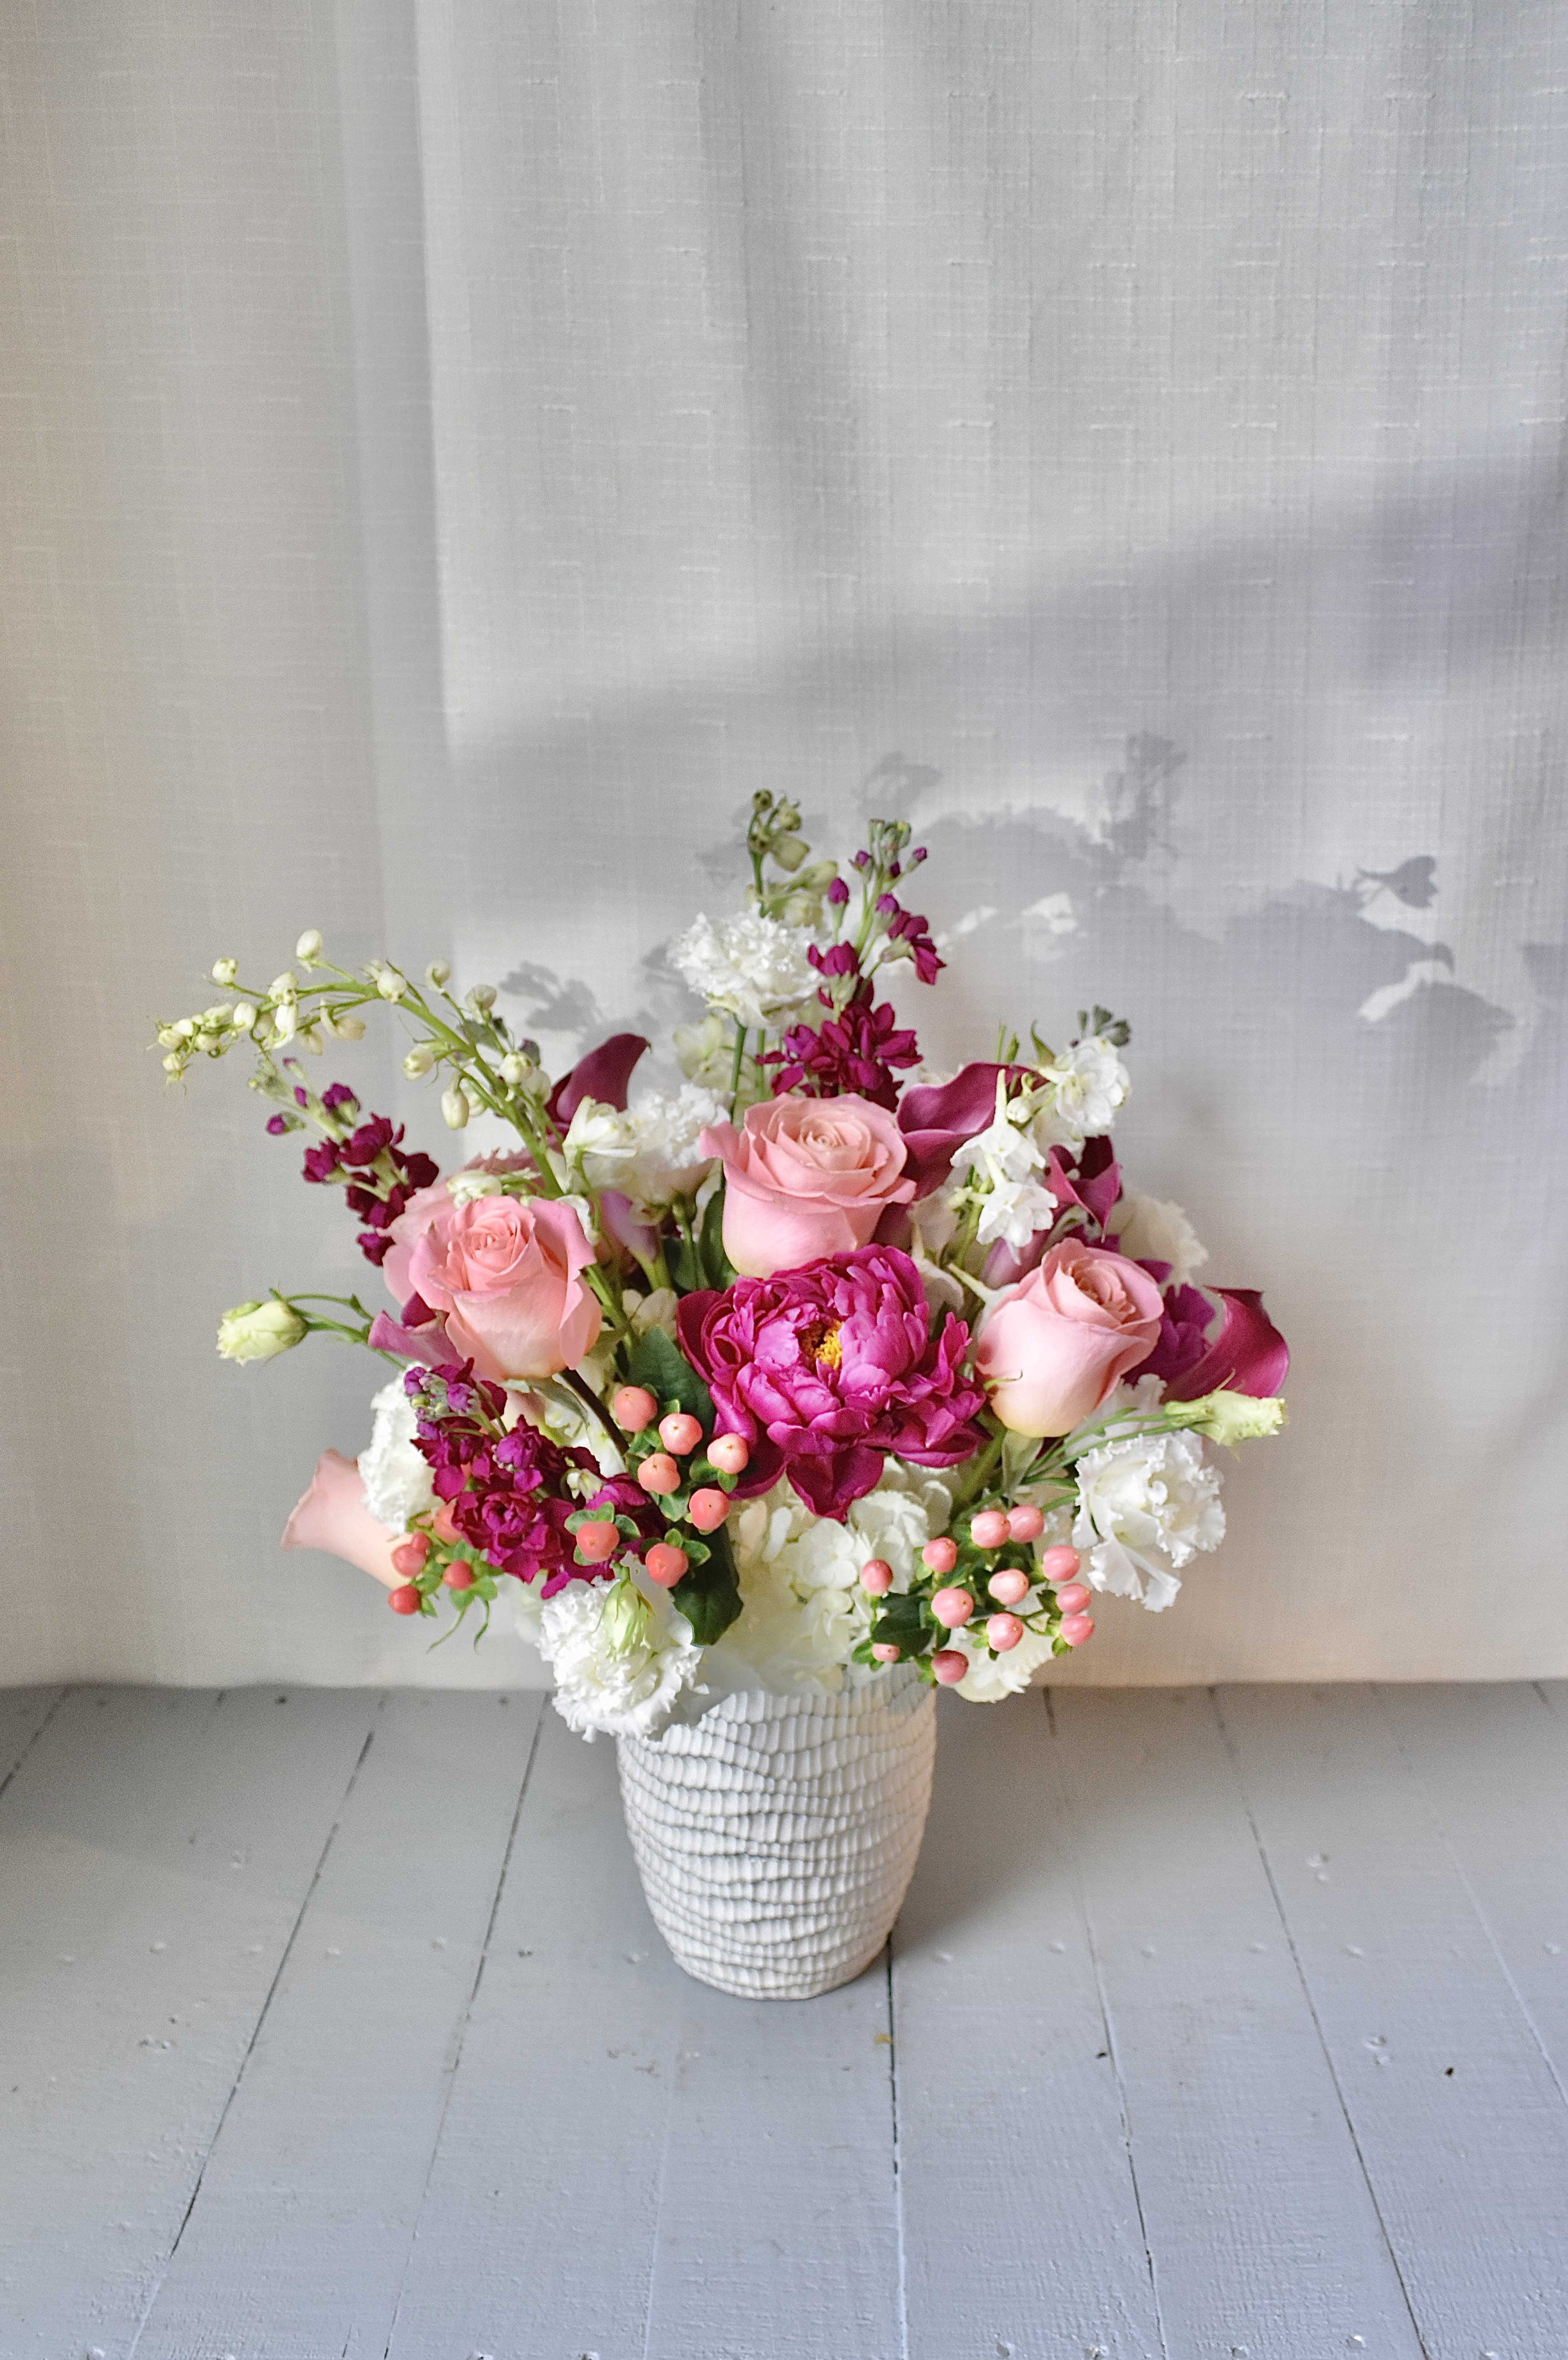 Hearts Aflame - A luxurious pastel floral design for every occasion, Hearts Aflame is a medium lush arrangement composed of roses, stock, callas and seasonal locally sourced flowers. 